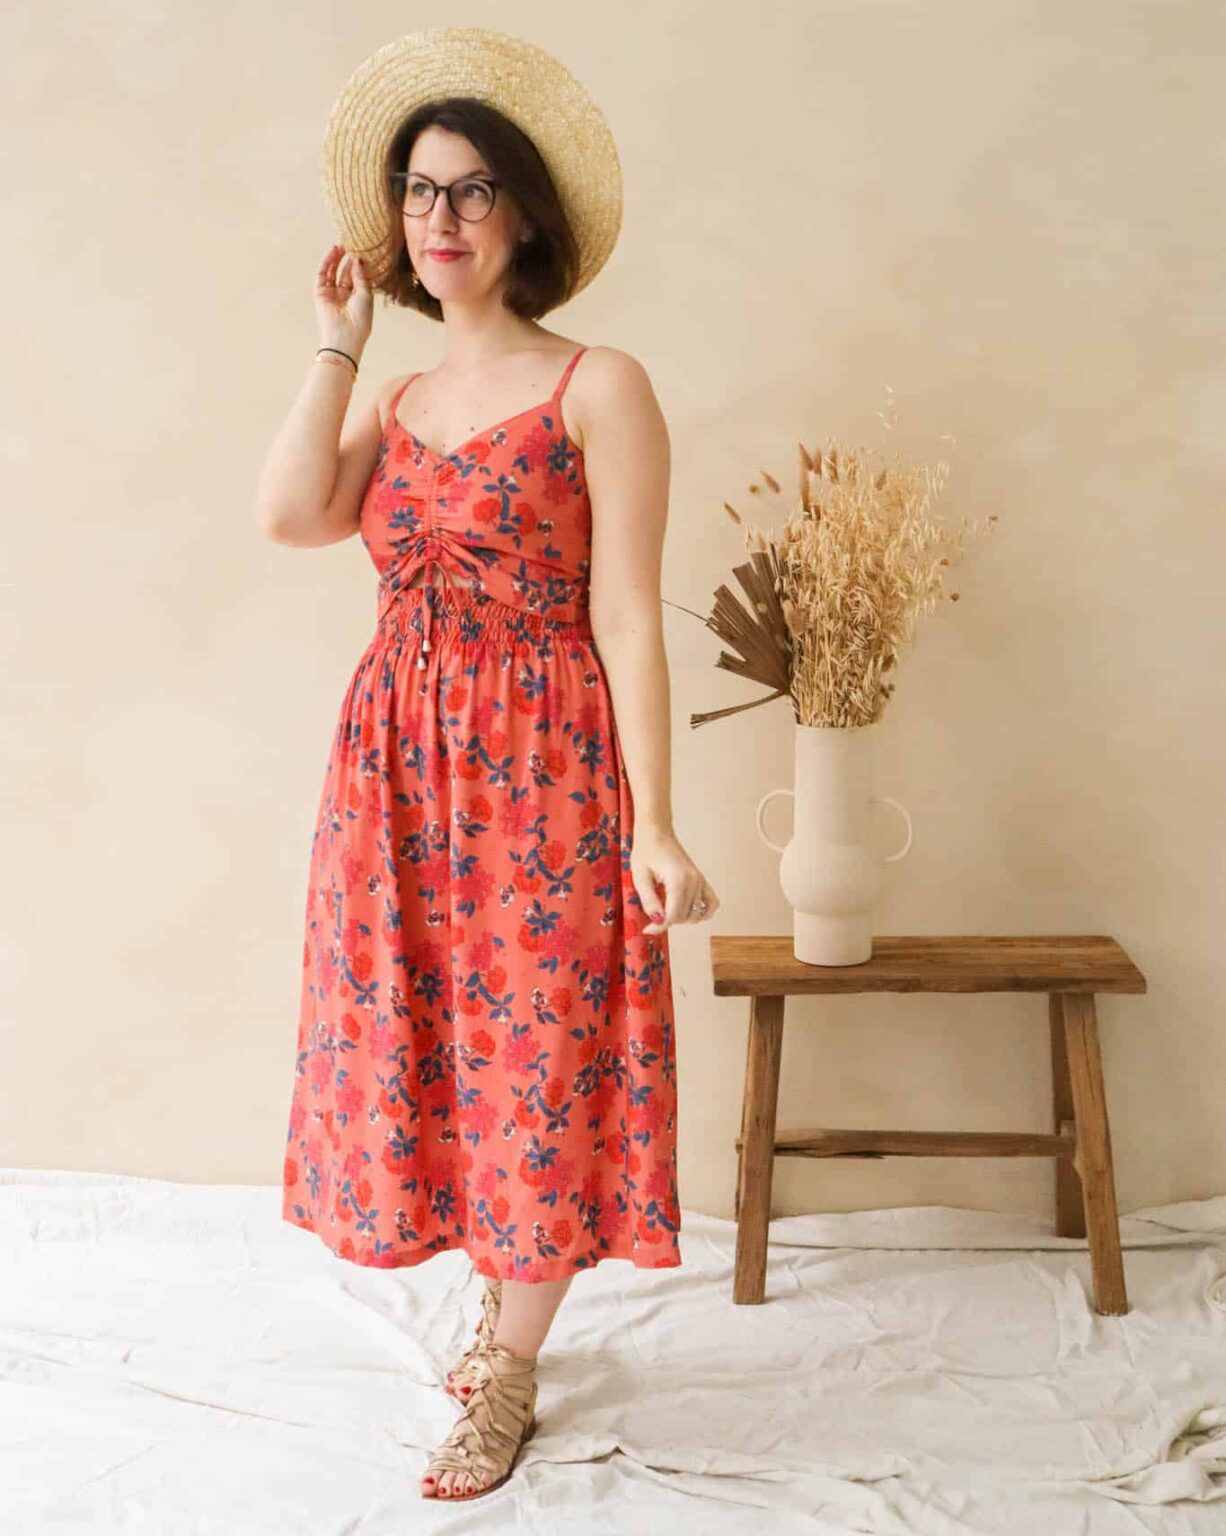 Lise Tailor - Poleen Dress Sewing Pattern